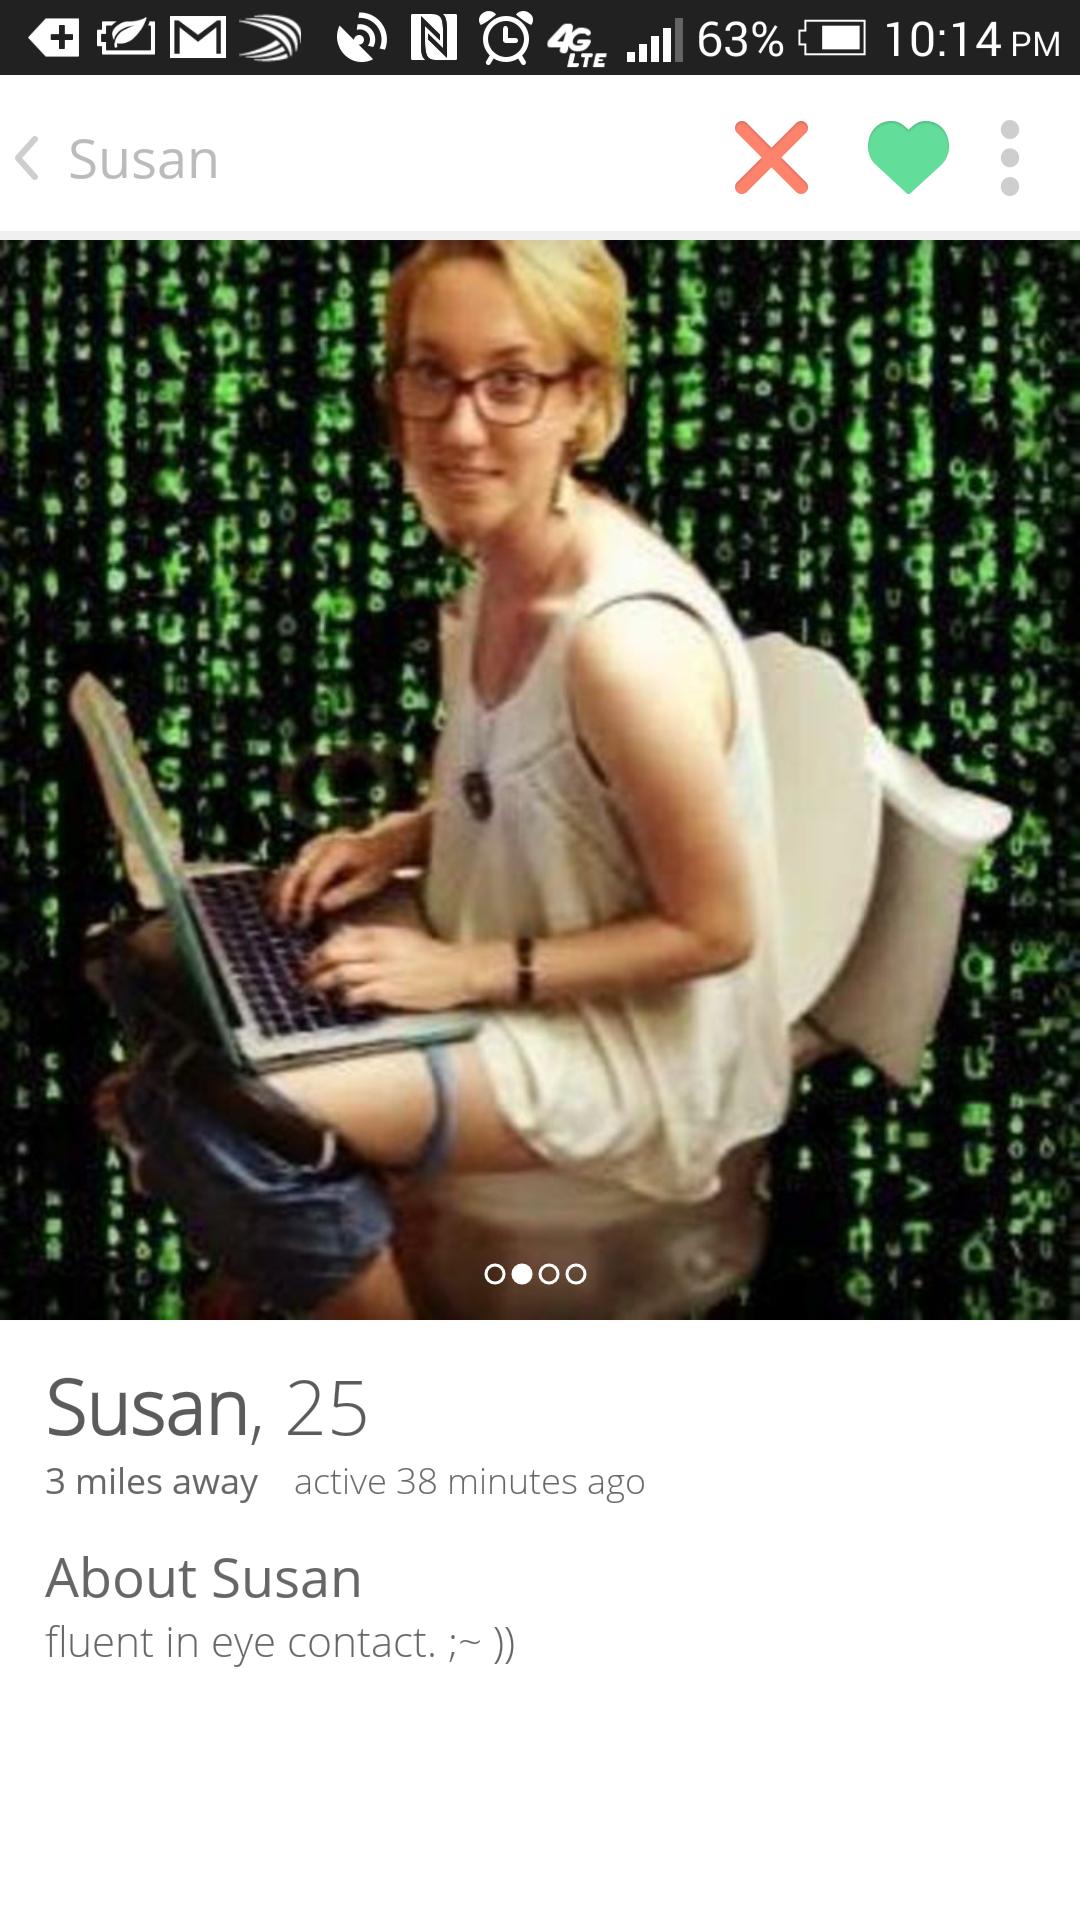 Girls on Tinder, go ahead and give up. Susan got Internet dating on lock.